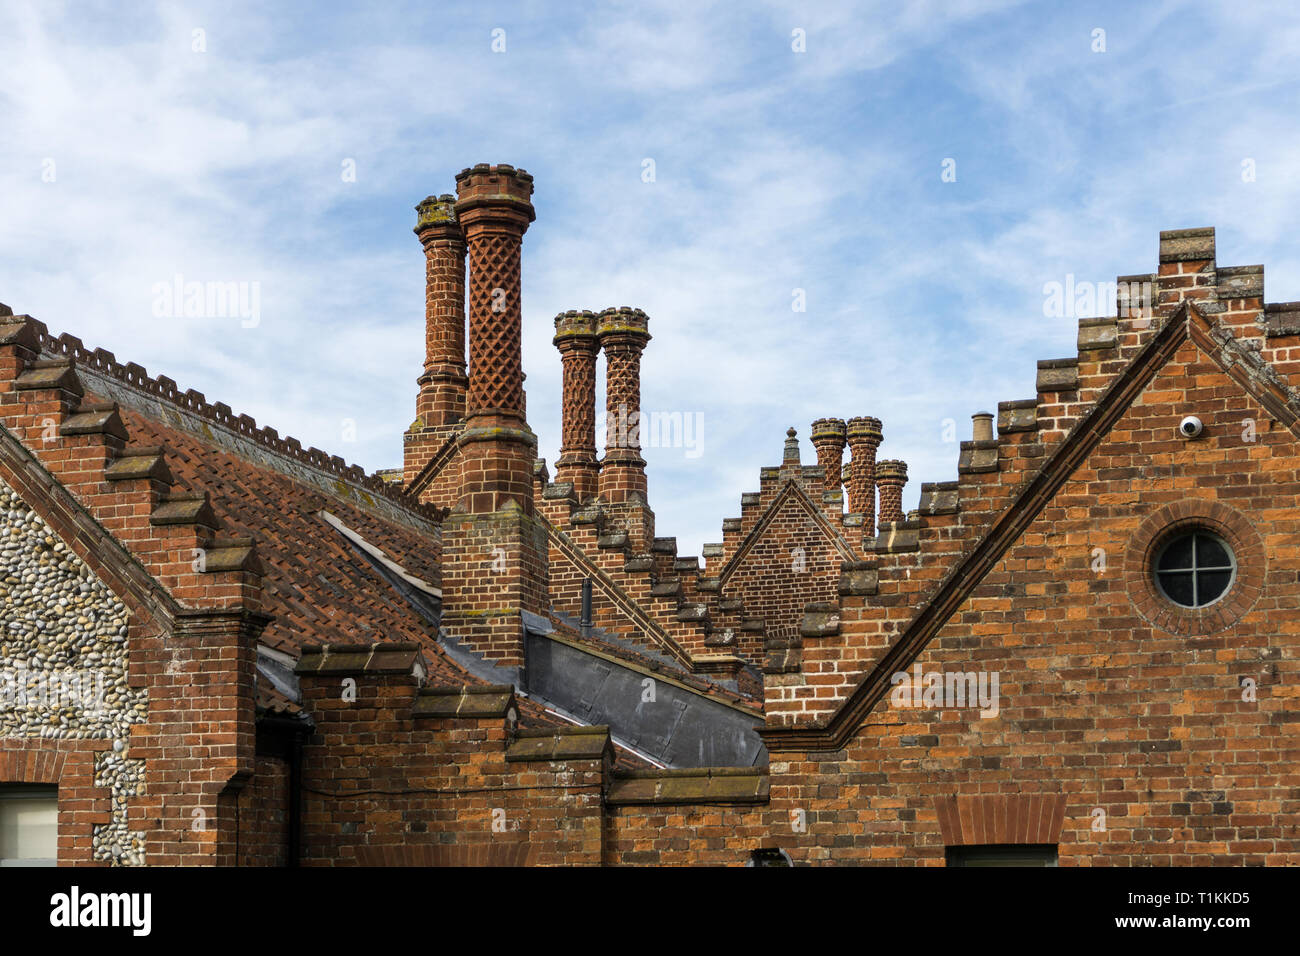 The roofline of the Ancient House, Holkham, Norfolk, UK; with ornate chimneys and stepped gables Stock Photo